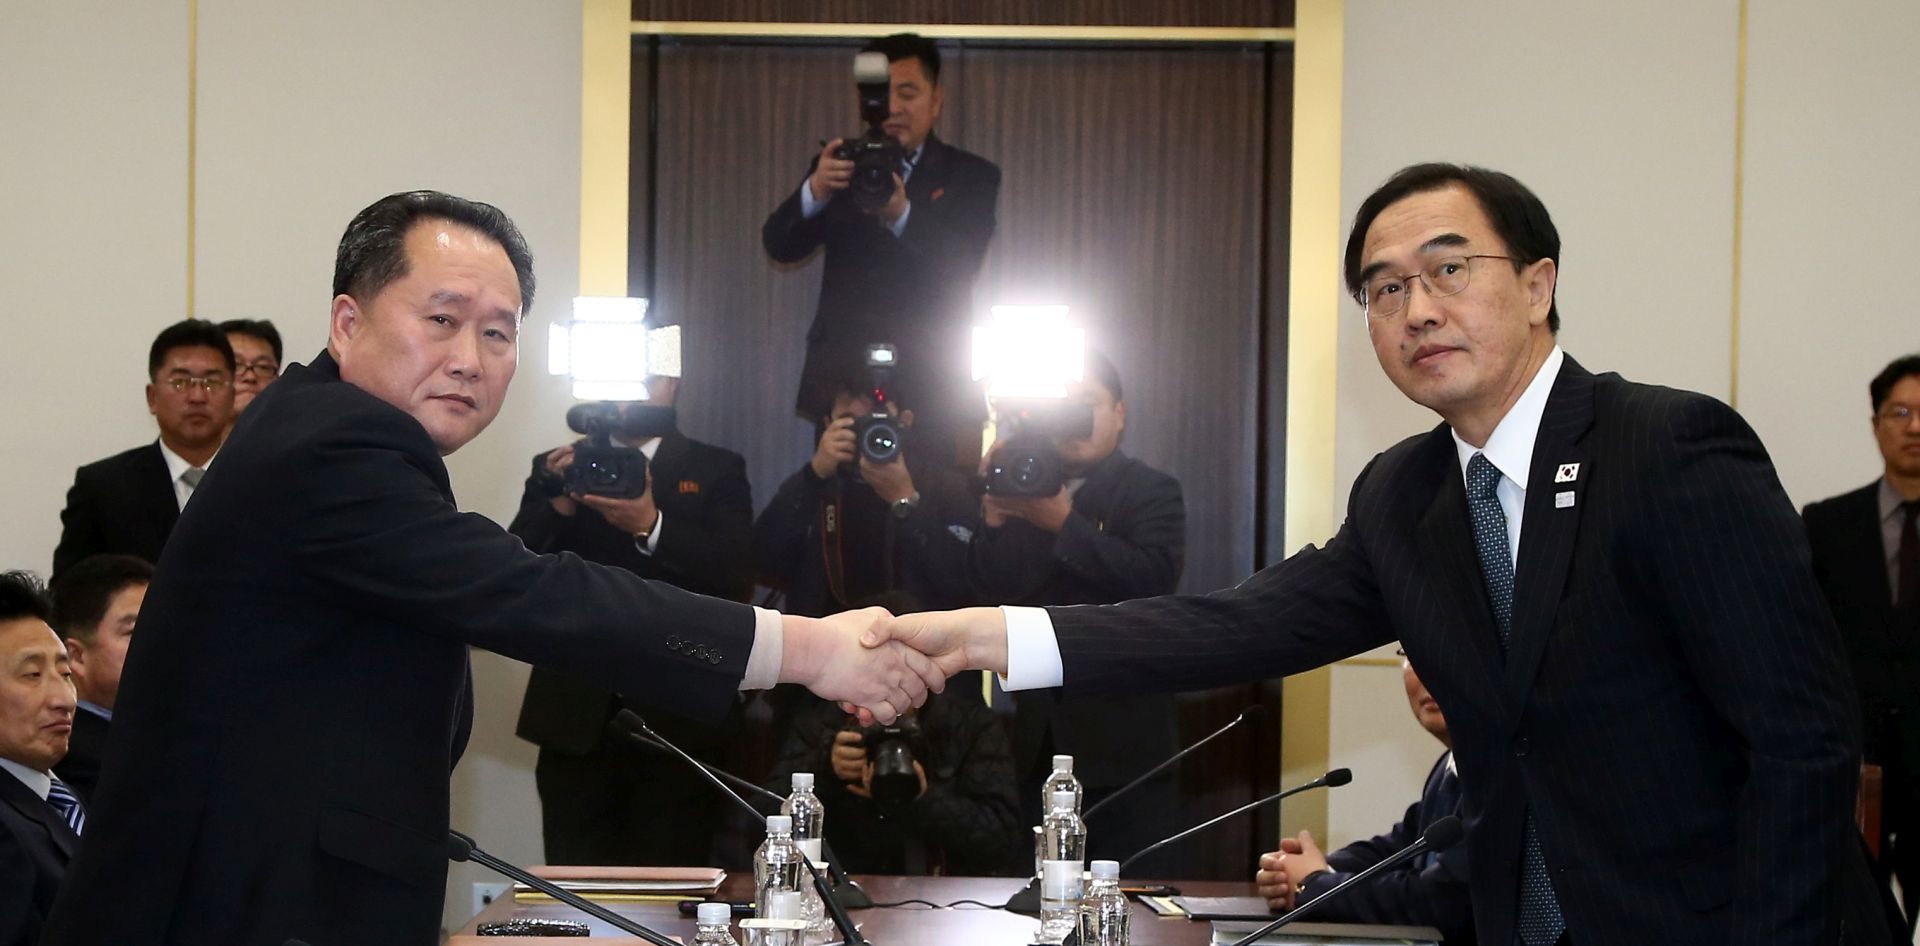 epa06426741 South Korean Unification Minister and chief delegate Cho Myoung-gyon (R) shakes hands with North Korea's chief delegate Ri Son-gwon (L) after their meeting in the truce village of Panminjom, in Paju, South Korea, 09 January 2018. North Korea agreed to send a delegation to the 2018 Winter Olympic Games, which will be hosted in February in South Korea. The South also proposed family reunions, for those who were separated during the Korean War, to take place during the Lunar New Year holiday, which falls in the same period of the Winter Olympics.  EPA/KOREA POOL